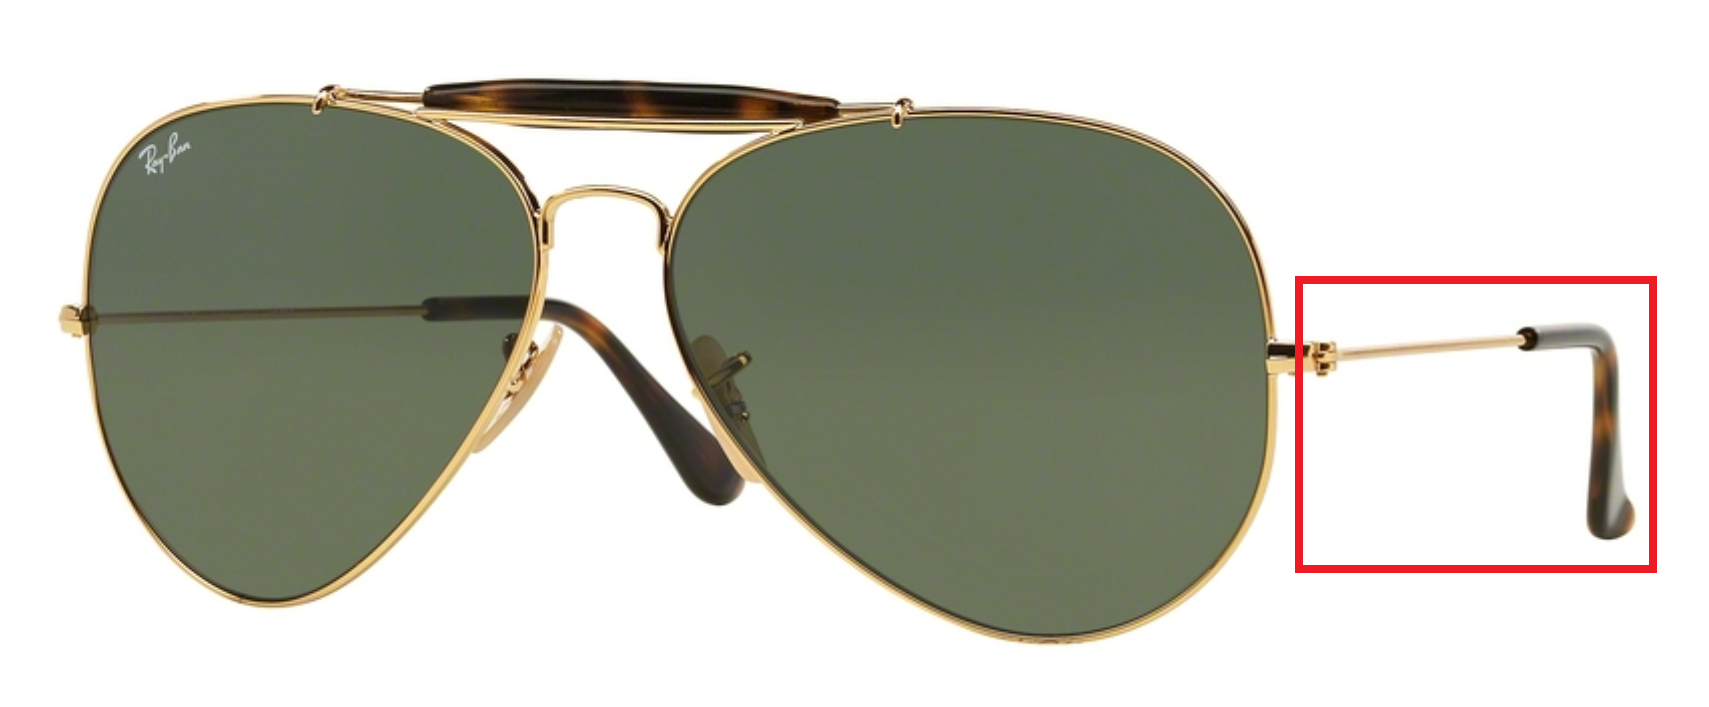 Ray-Ban pootjes